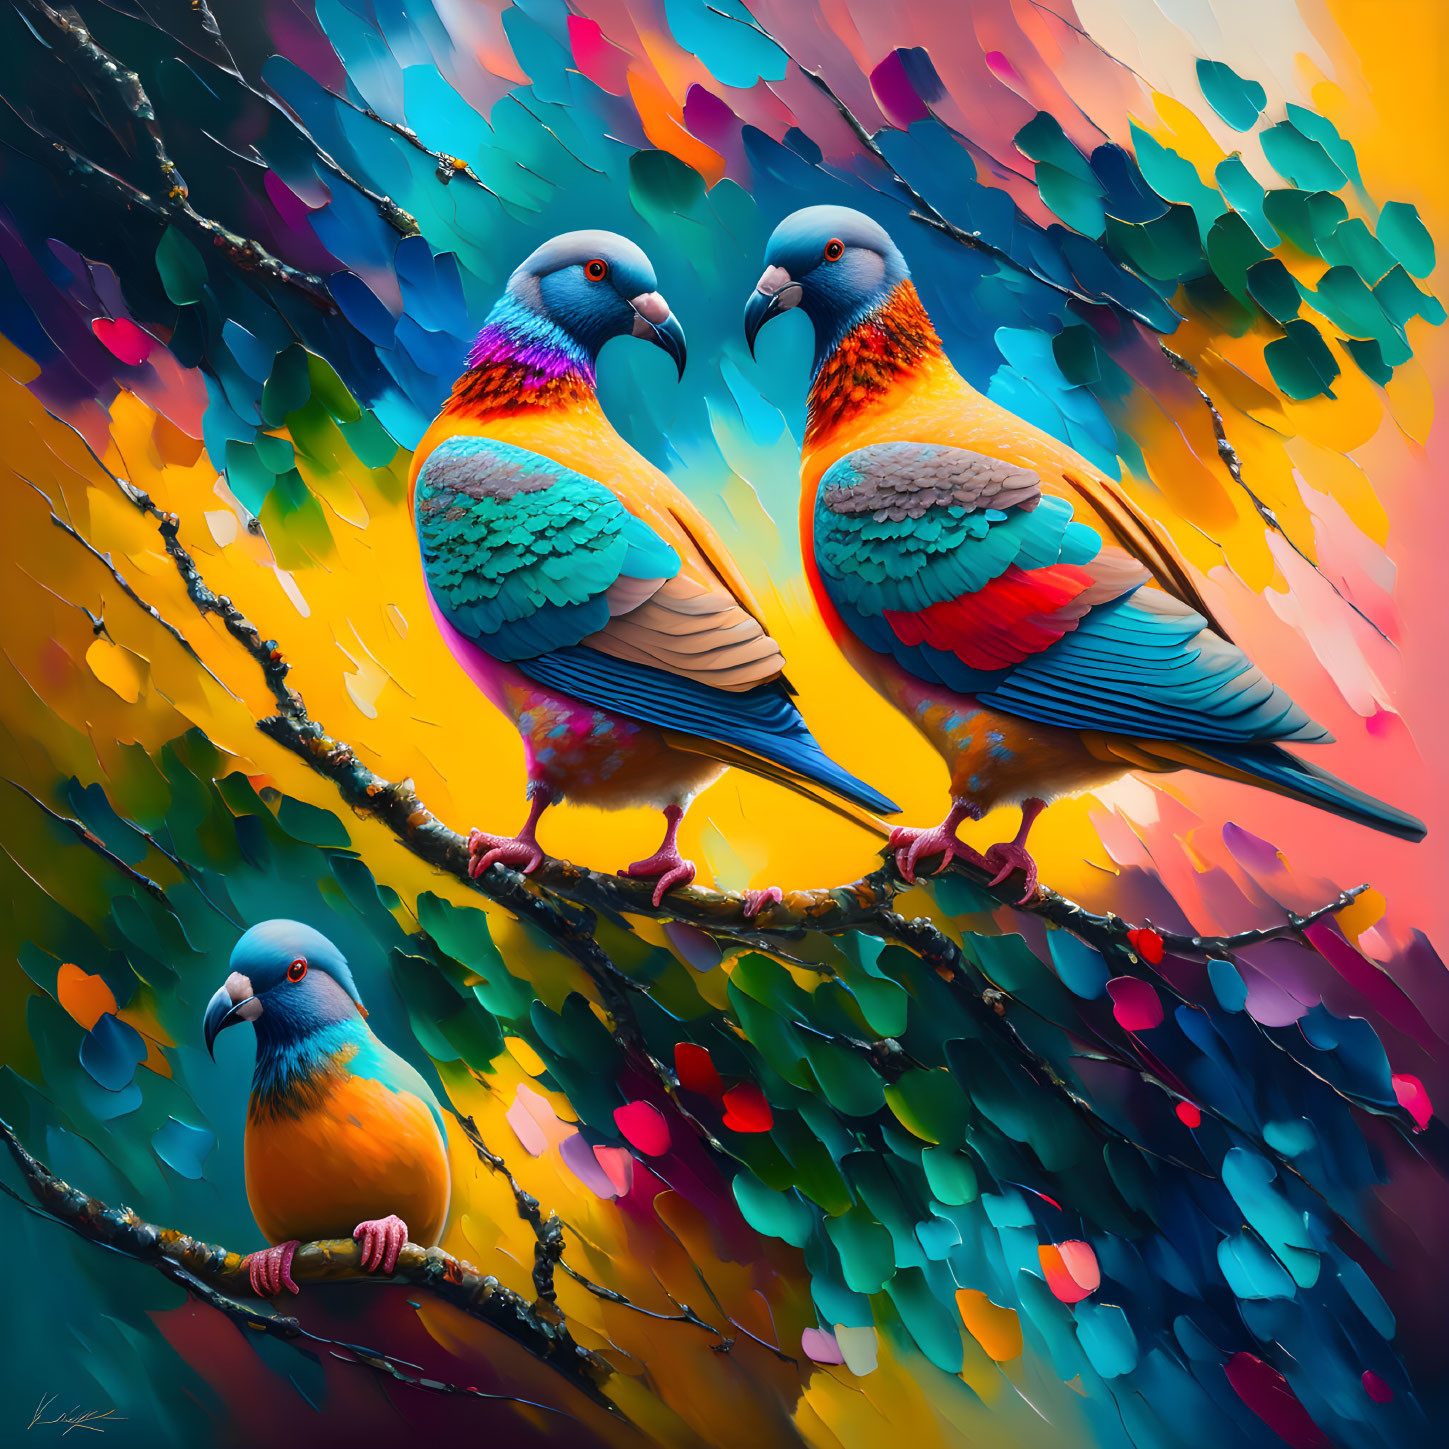 Colorful Parrots Perched on Branches Against Abstract Background